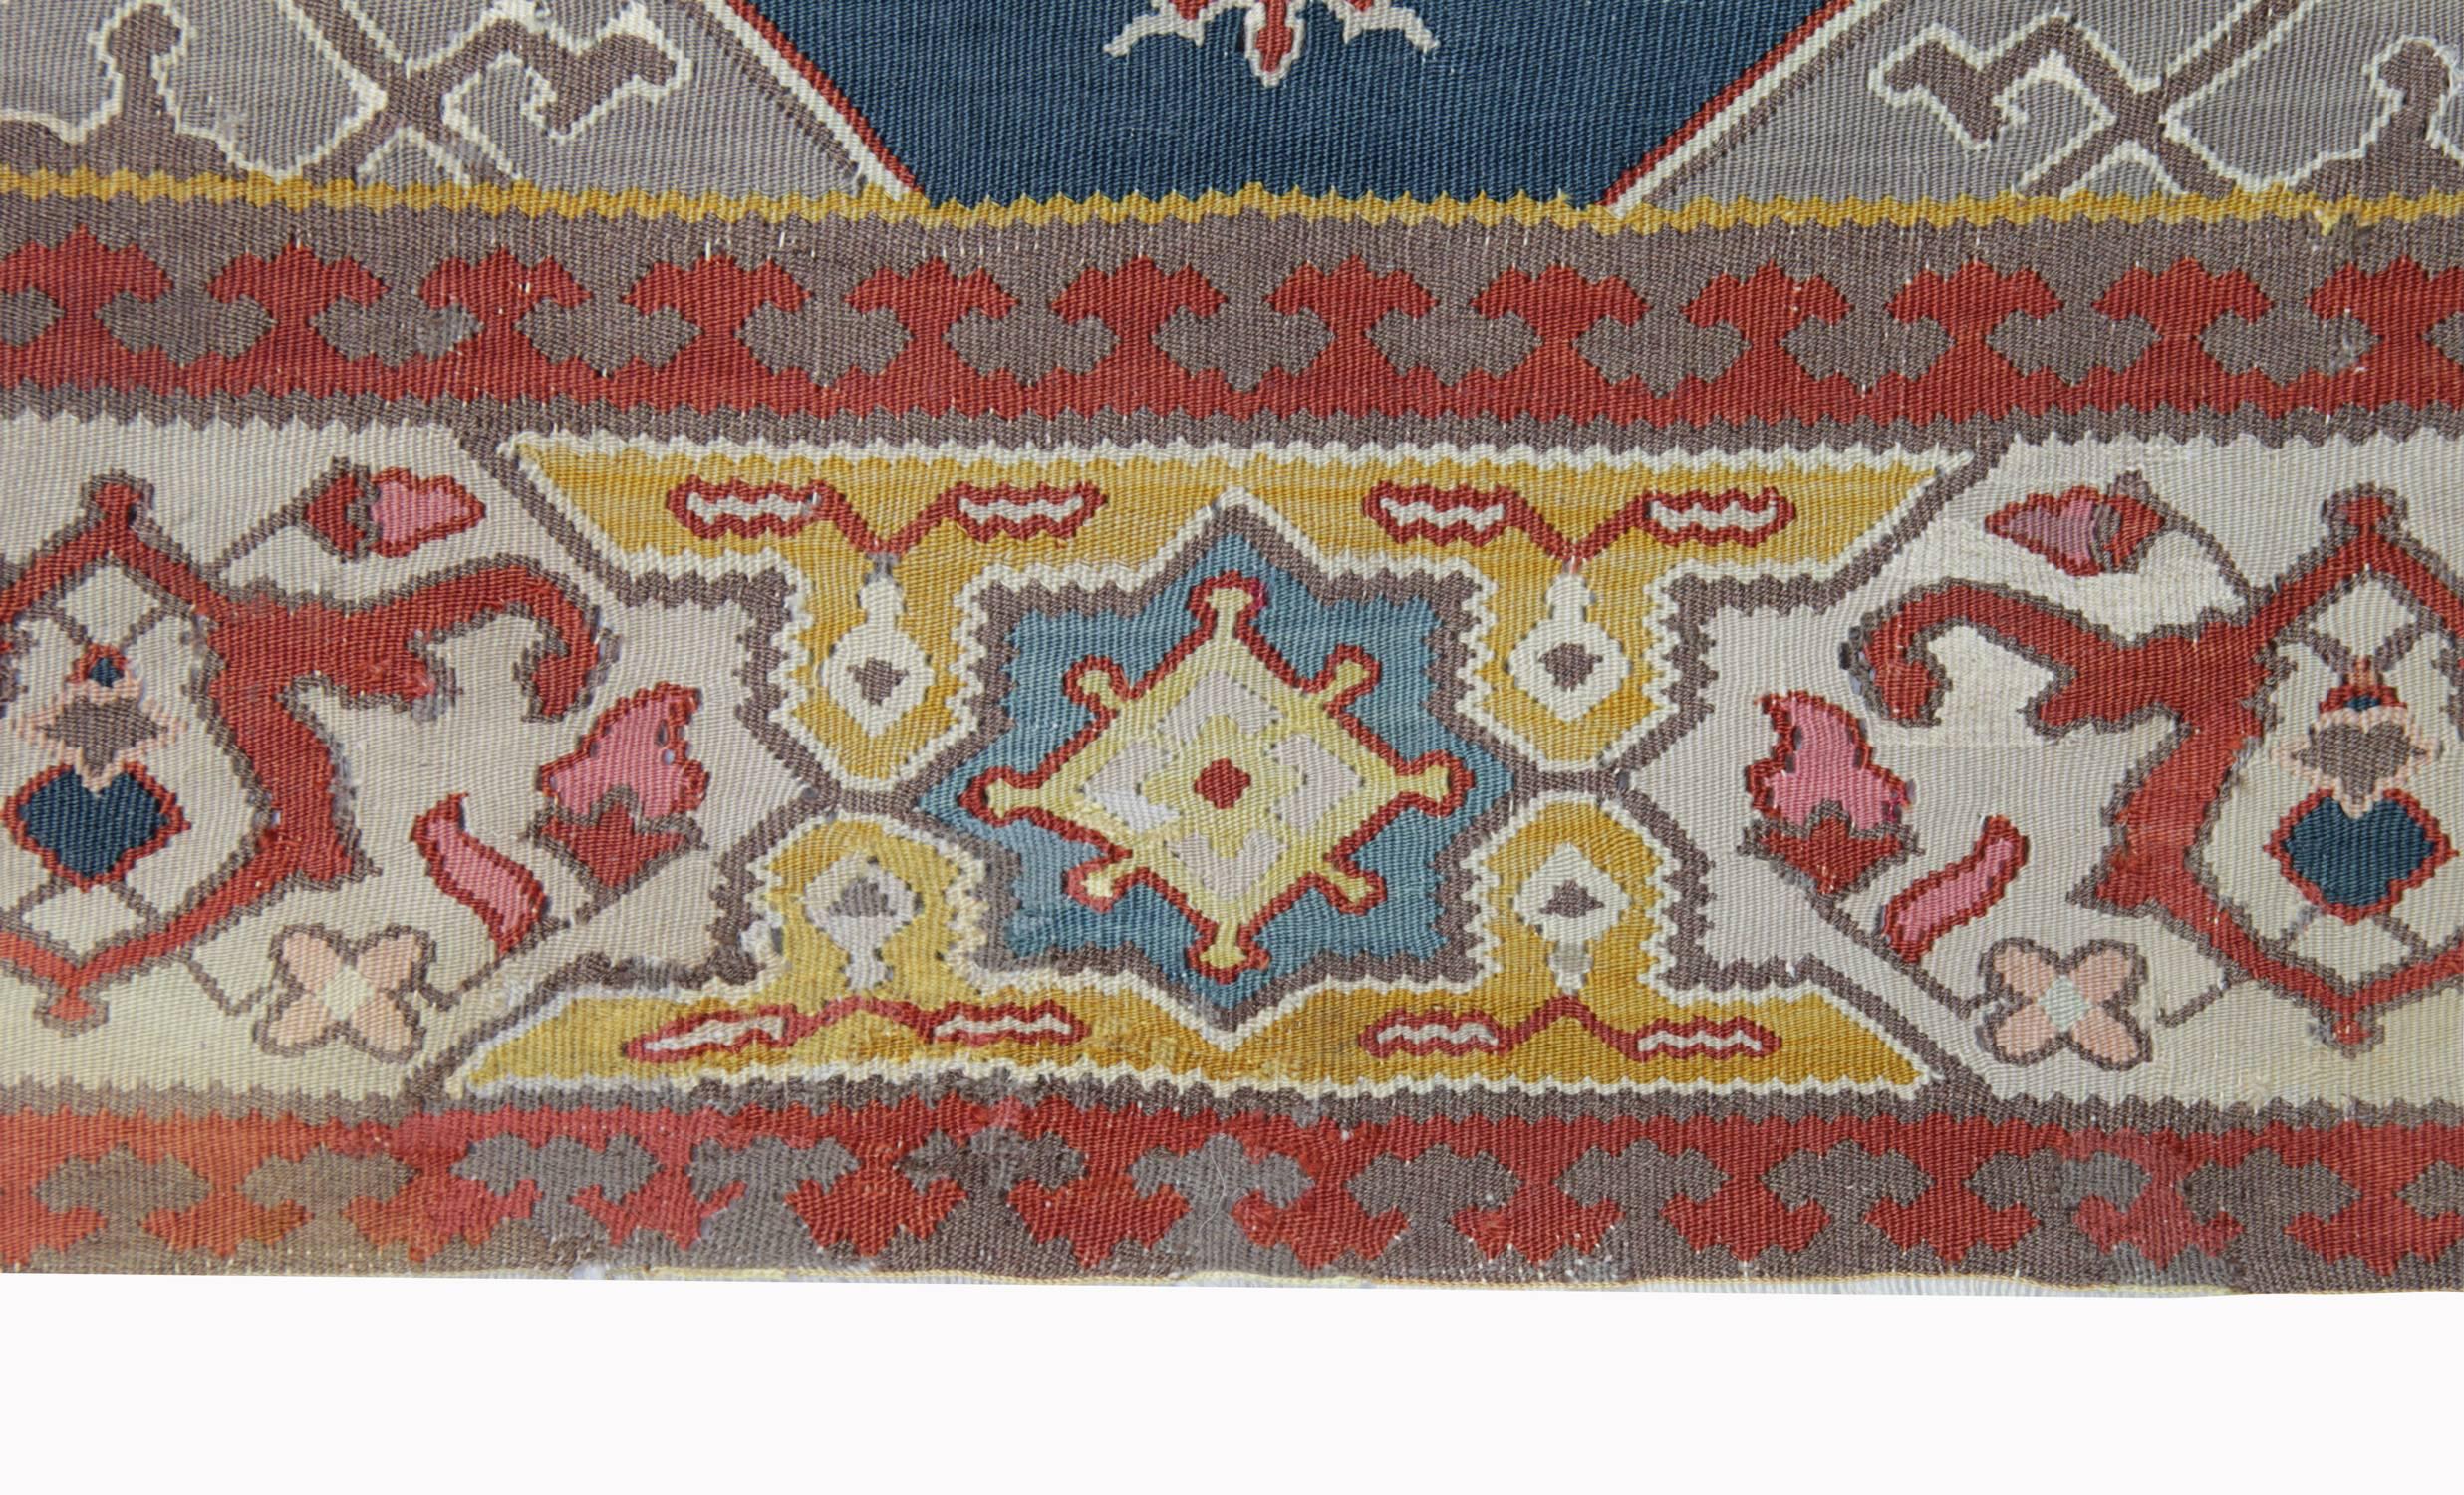 Hand-Knotted Square Rugs Handmade Carpet Antique Rugs, Kilim Rugs Luxury Rustic Oriental Rugs For Sale